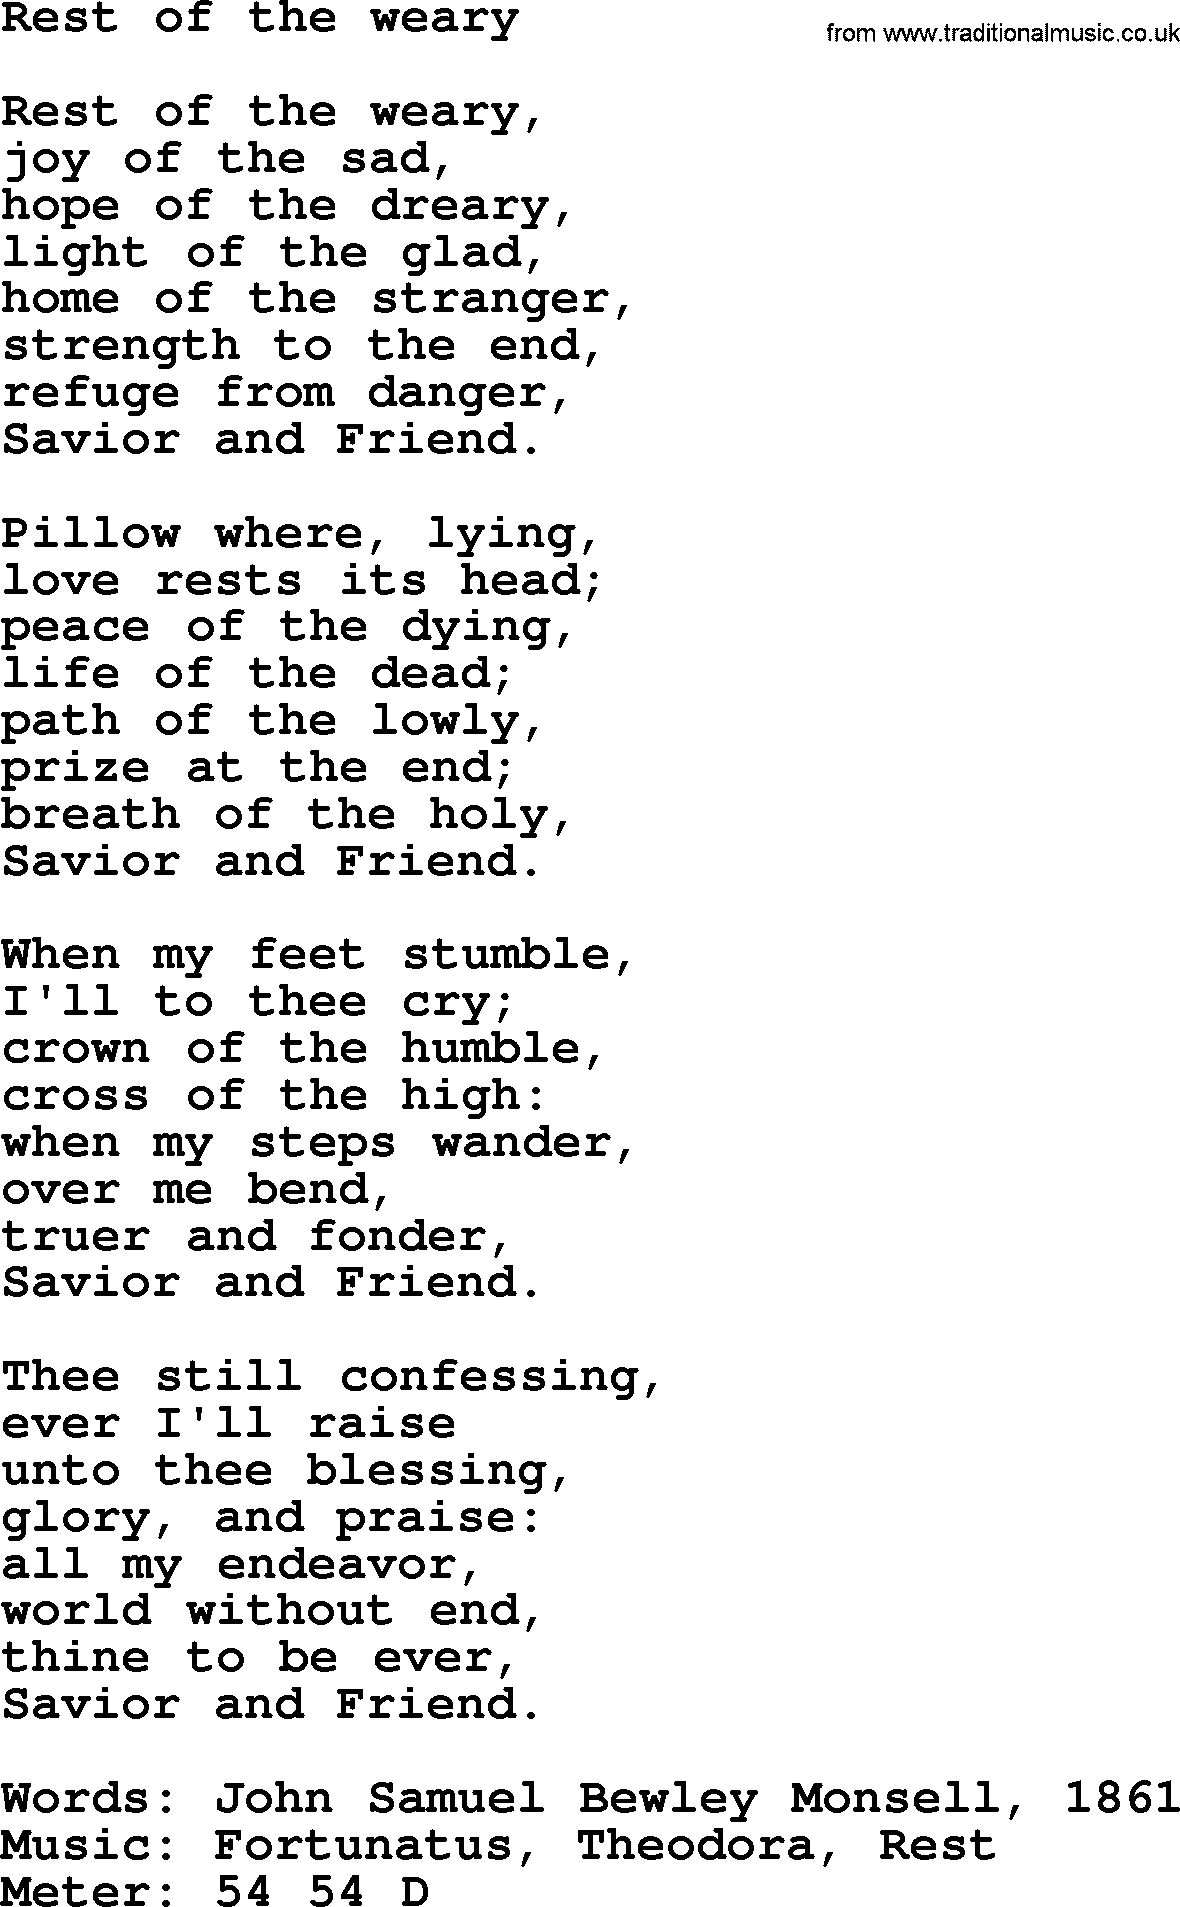 Book of Common Praise Hymn: Rest Of The Weary.txt lyrics with midi music